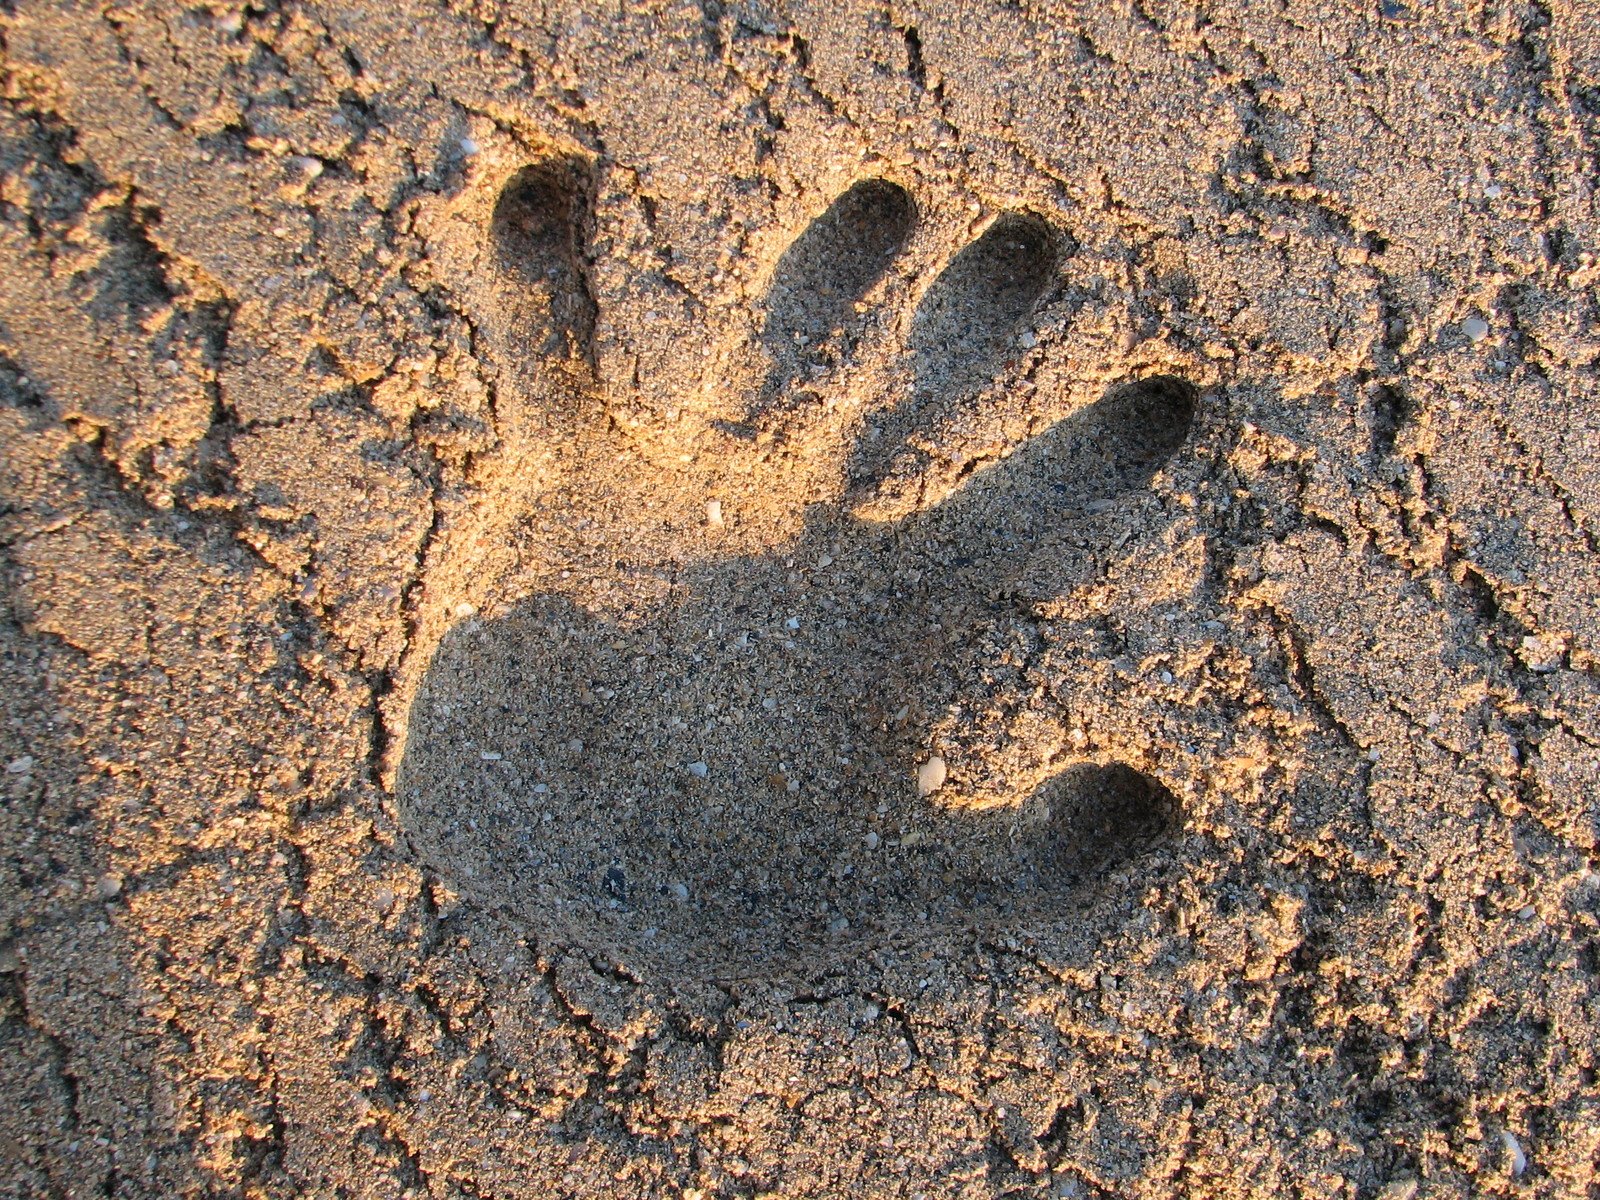 a dog's shadow in the sand with its paw imprint